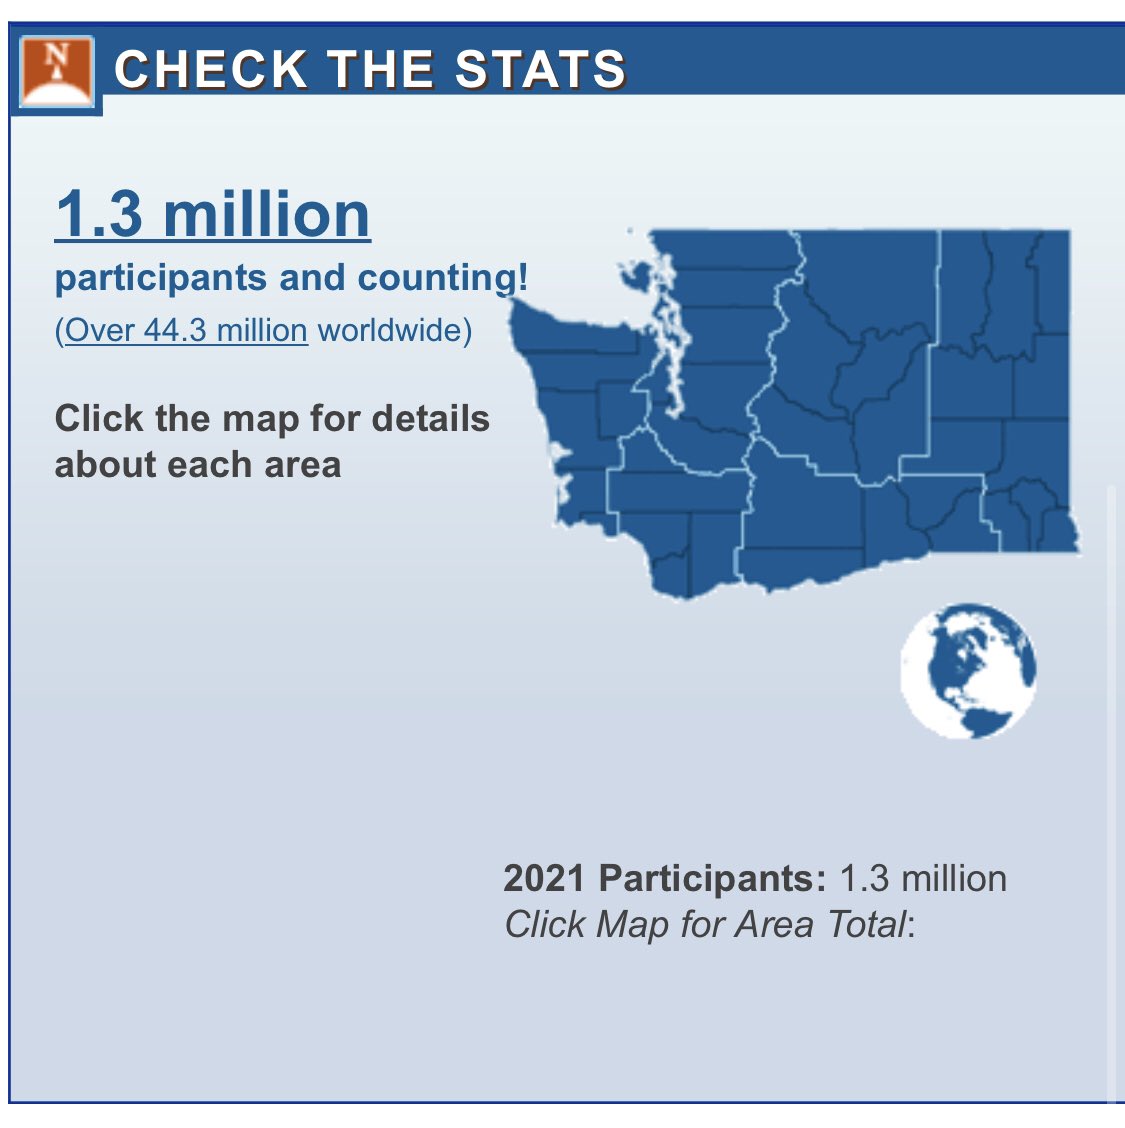 Who is ready to #ShakeOut with us TODAY? ➡️ 10:20a.m. We’re already at 1.3 million participants in WA & millions more across the country. Register at shakeout.org/Washington @ShakeOut